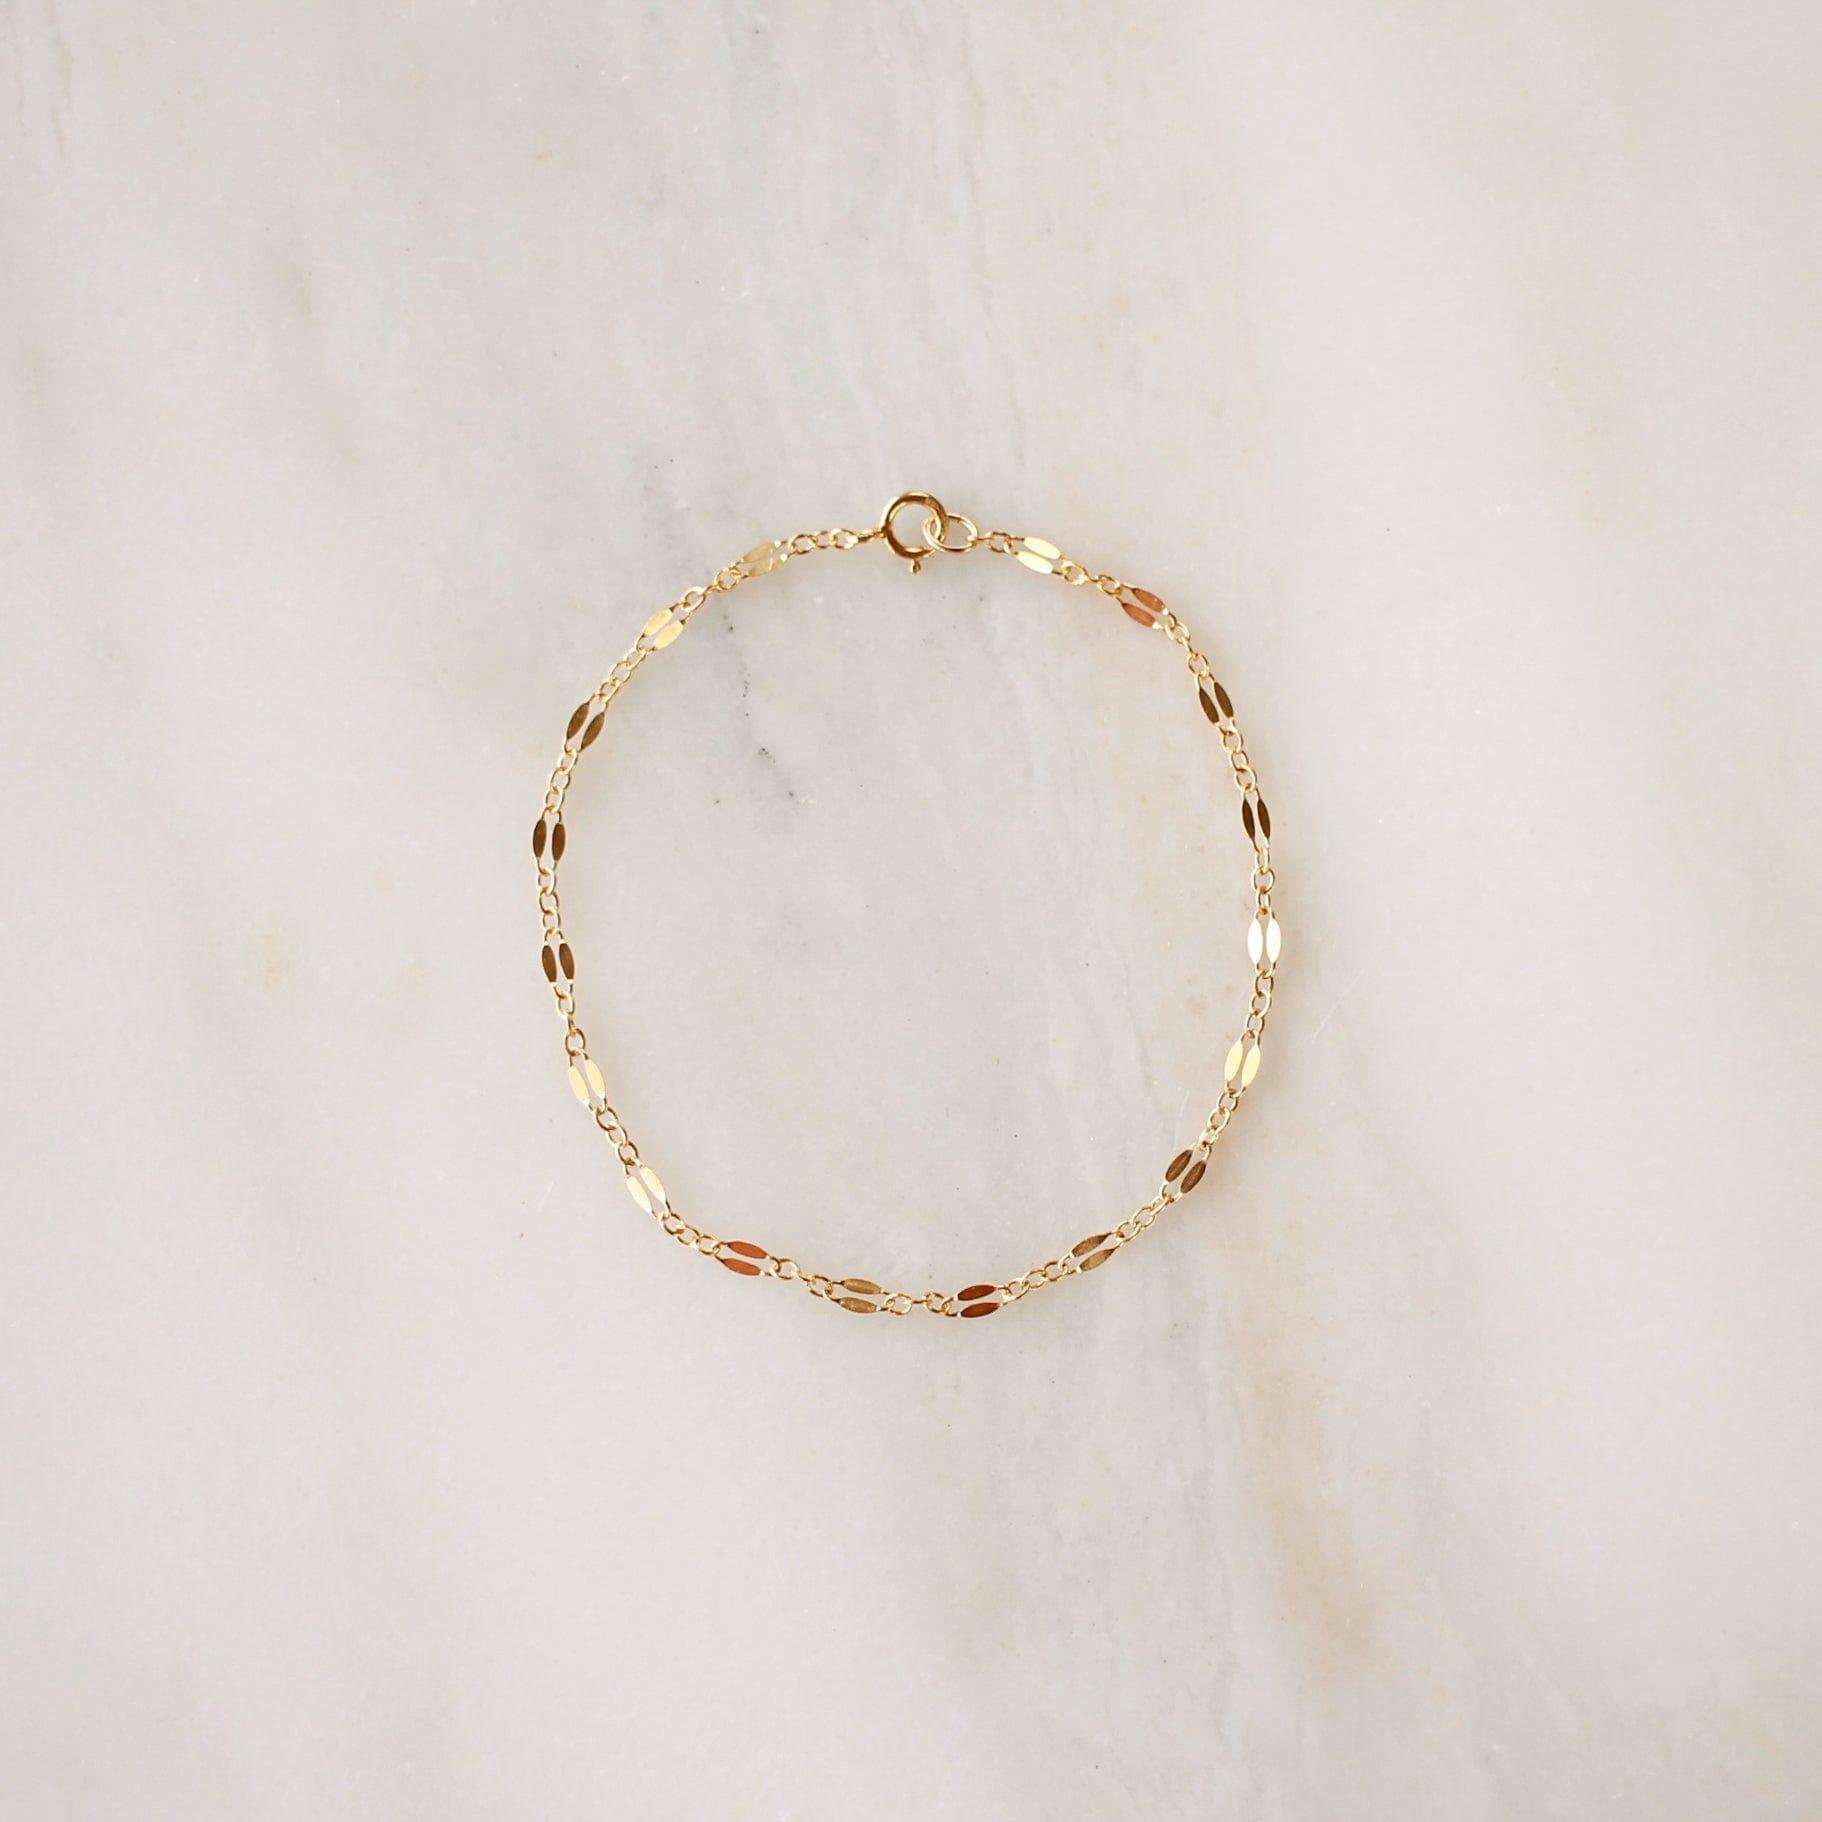 Lace Chain Bracelet - Nolia Jewelry - Meaningful + Sustainably Handcrafted Jewelry